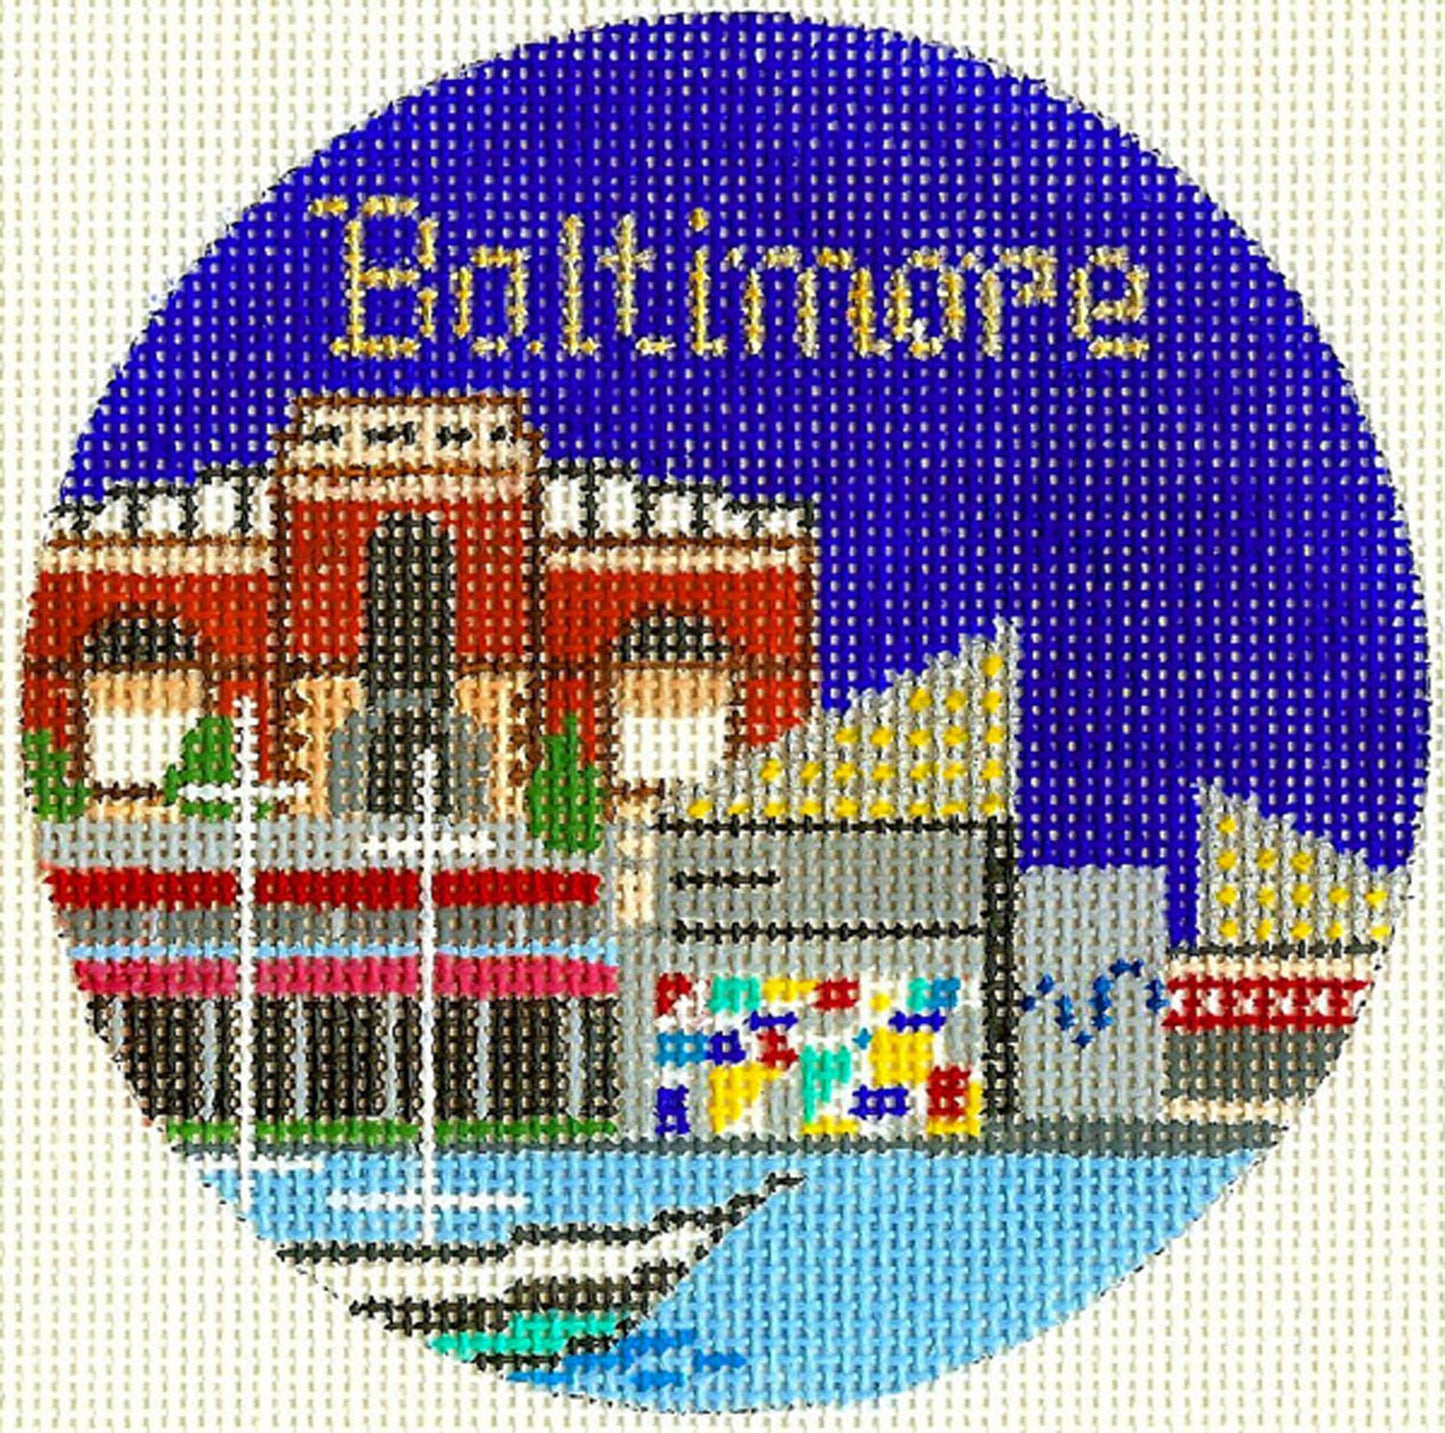 Travel Round ~ Baltimore, Maryland handpainted 4.25" Needlepoint Canvas by Silver Needle